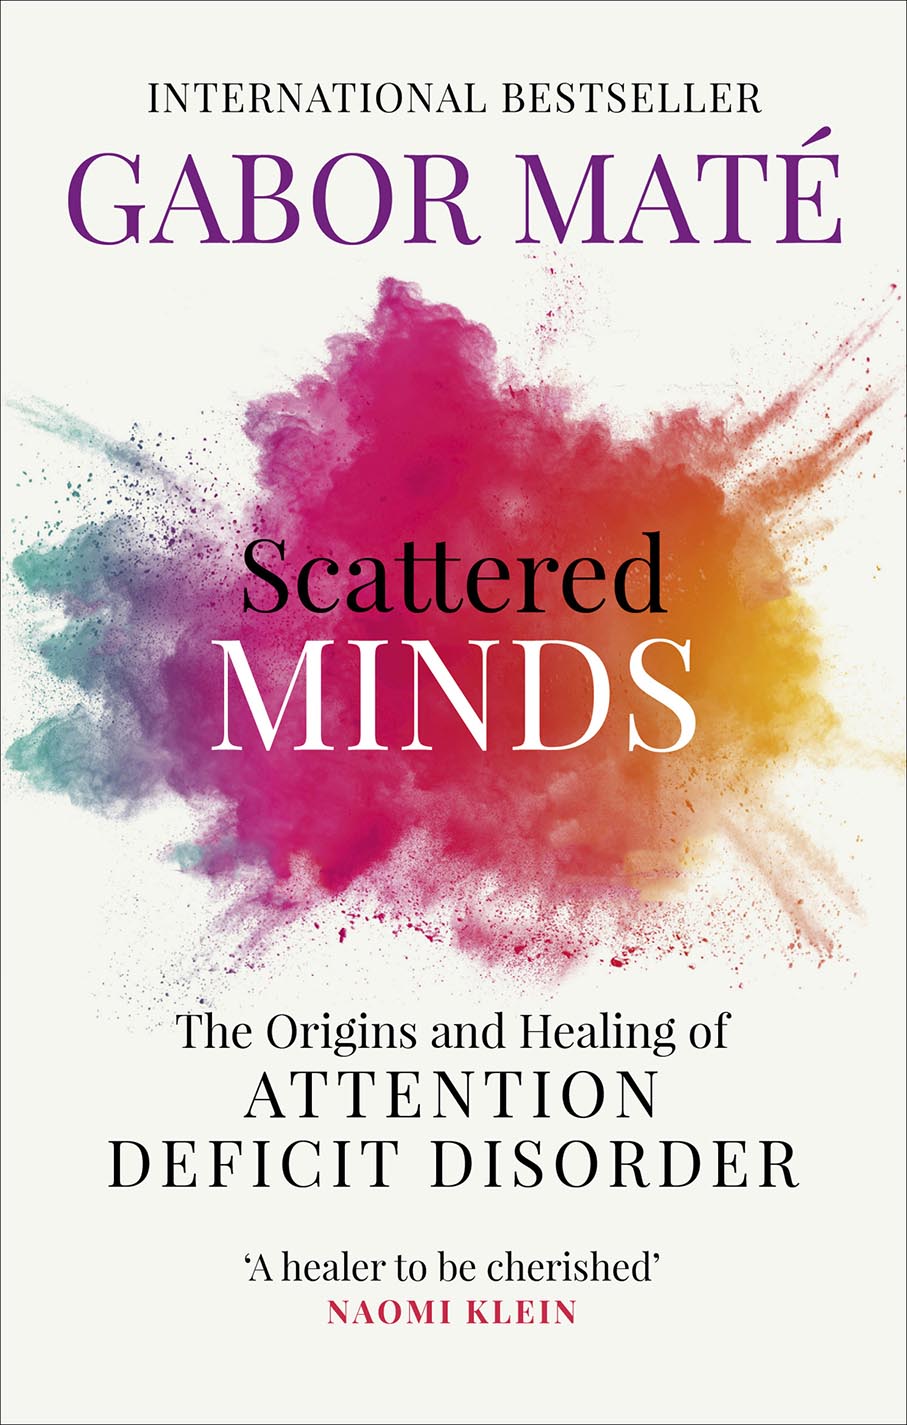 Scattered Minds - The Origins and Healing of Attention Deficit Disorder - Gabor Mate